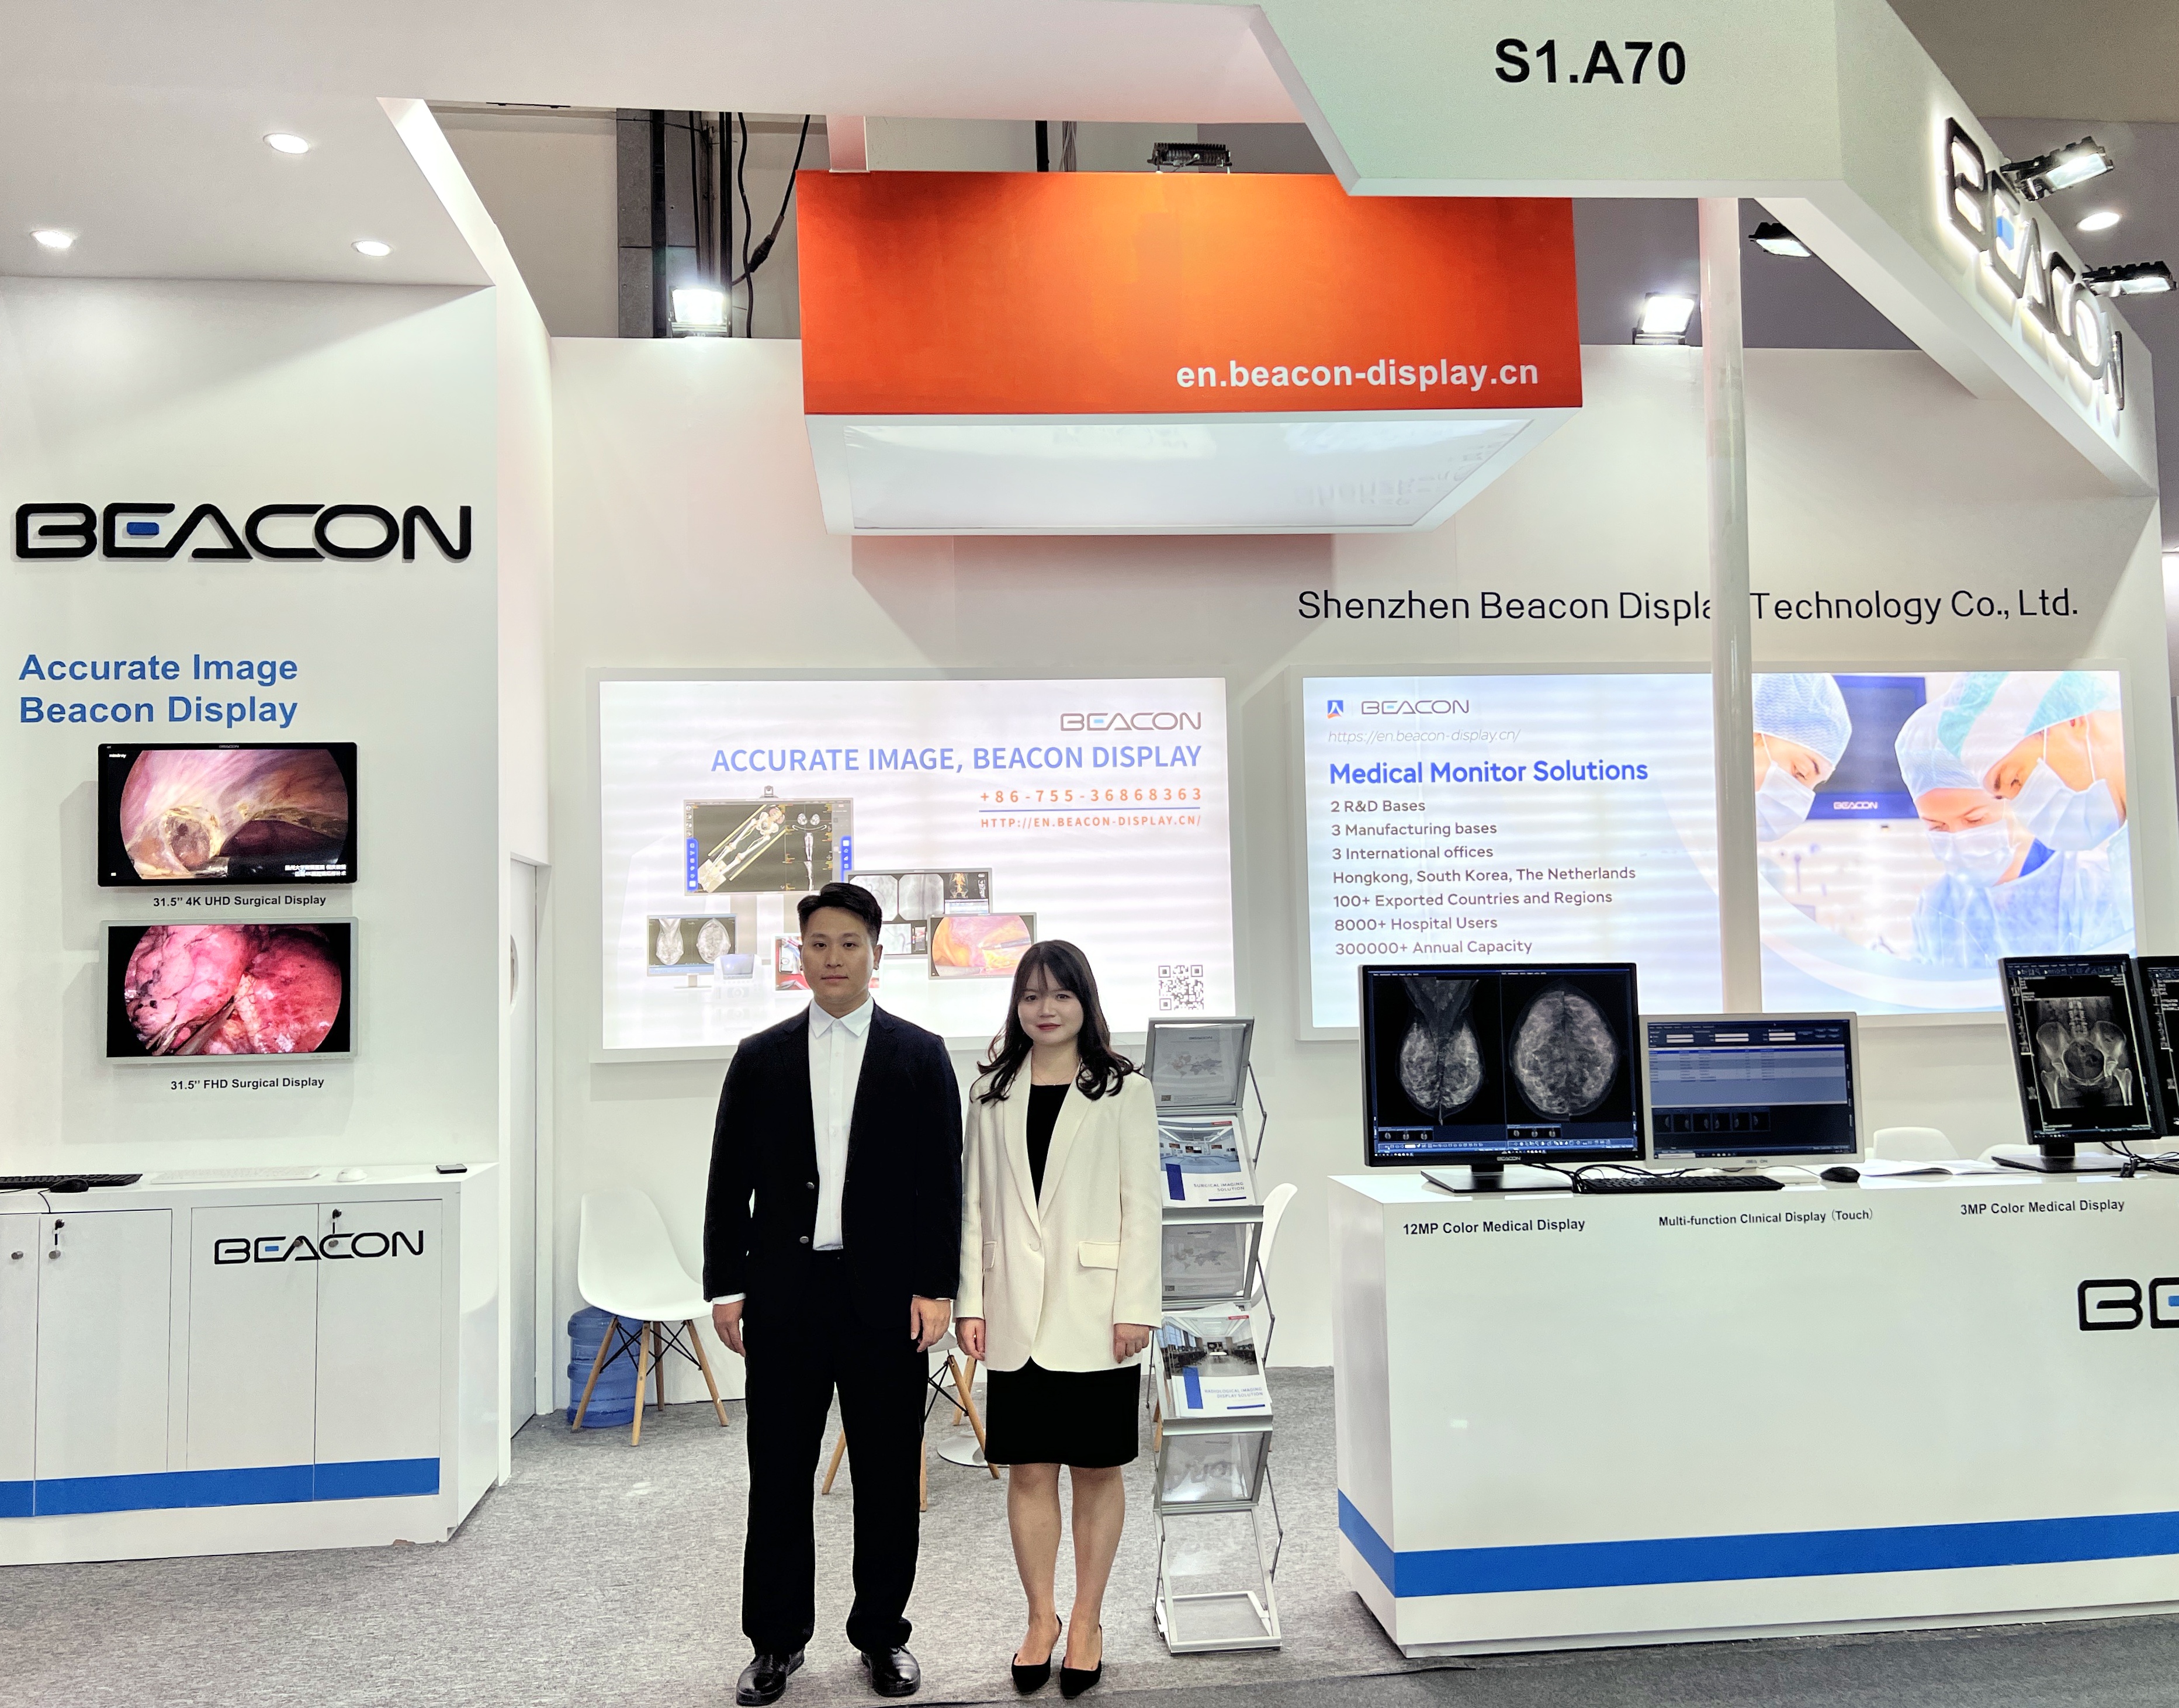 Starting the New Year, Beacon shines at the 2023 Arab Health